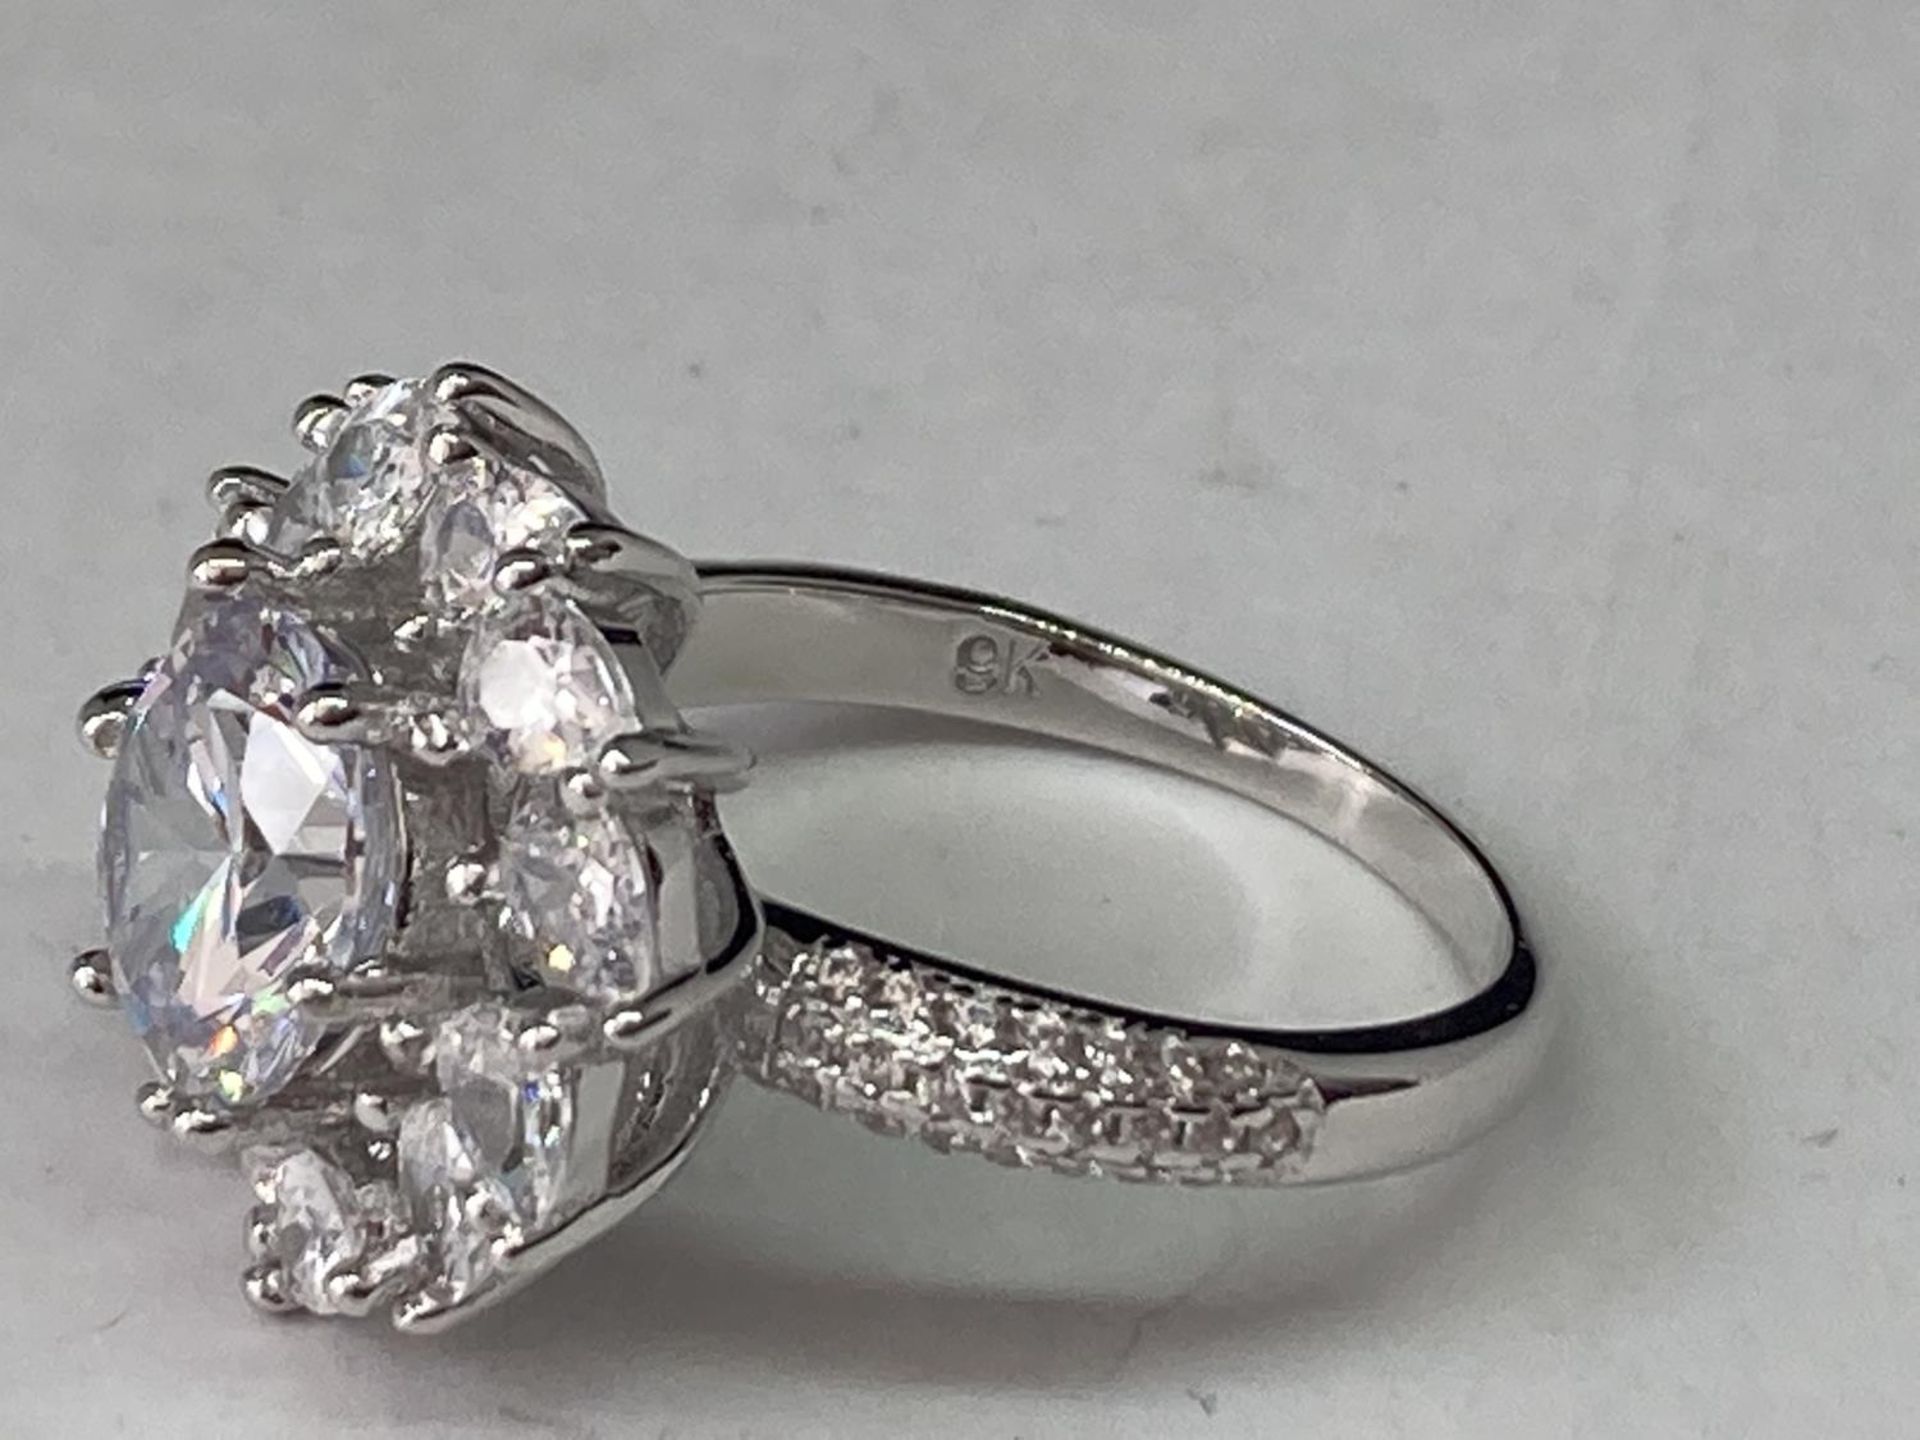 A WHITE METAL RING WITH 3 CARATS OF MOISSANITE IN A CLUSTER DESIGN SIZE Q - Image 4 of 6